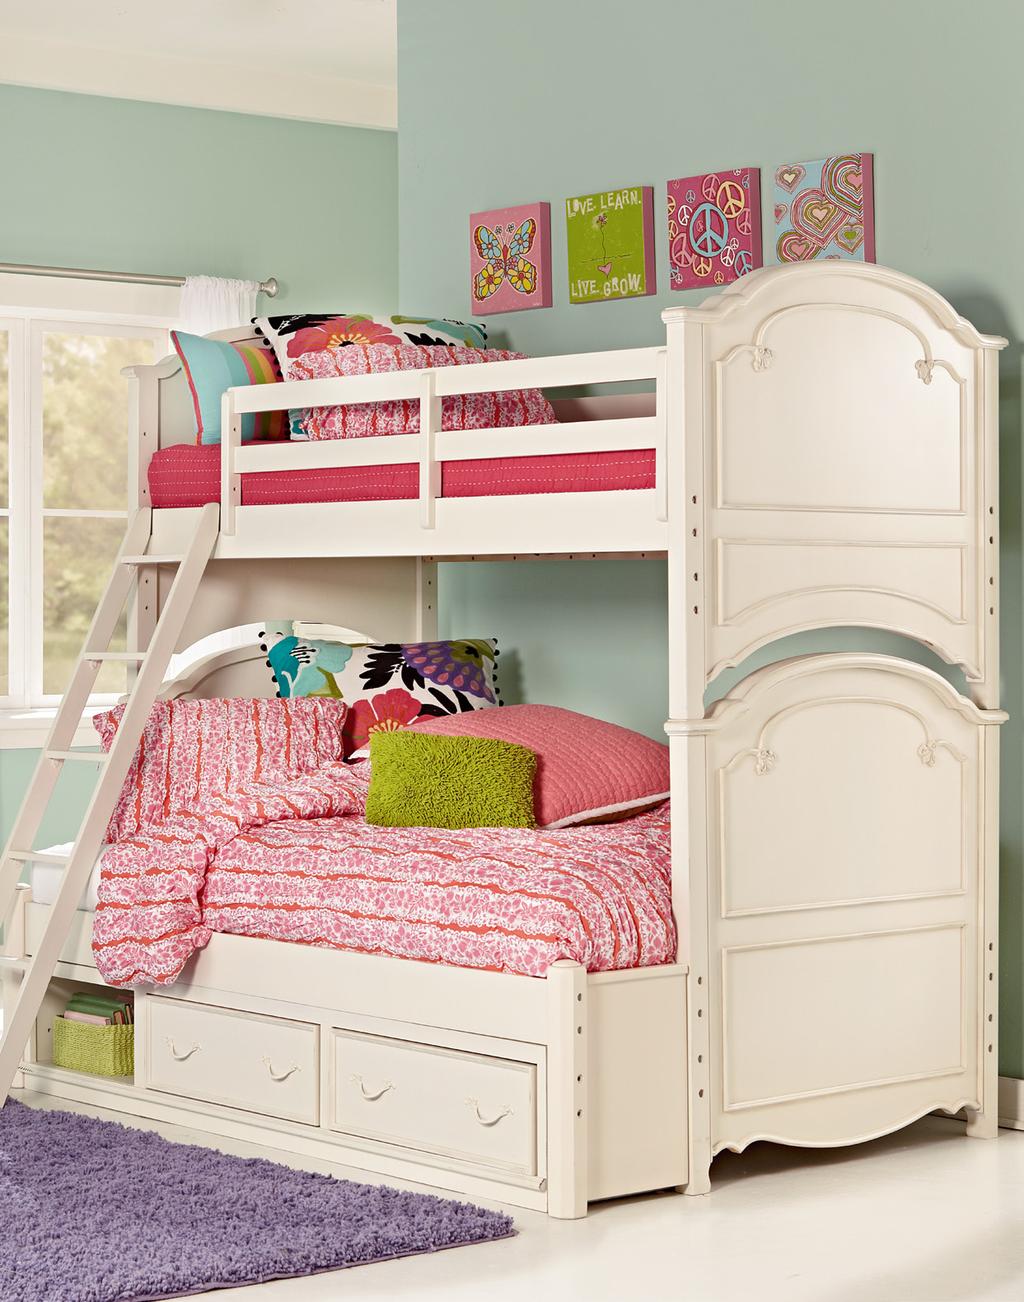 Bunk Bed, Twin over Full 3850-8140K 71w x 82d x 79h